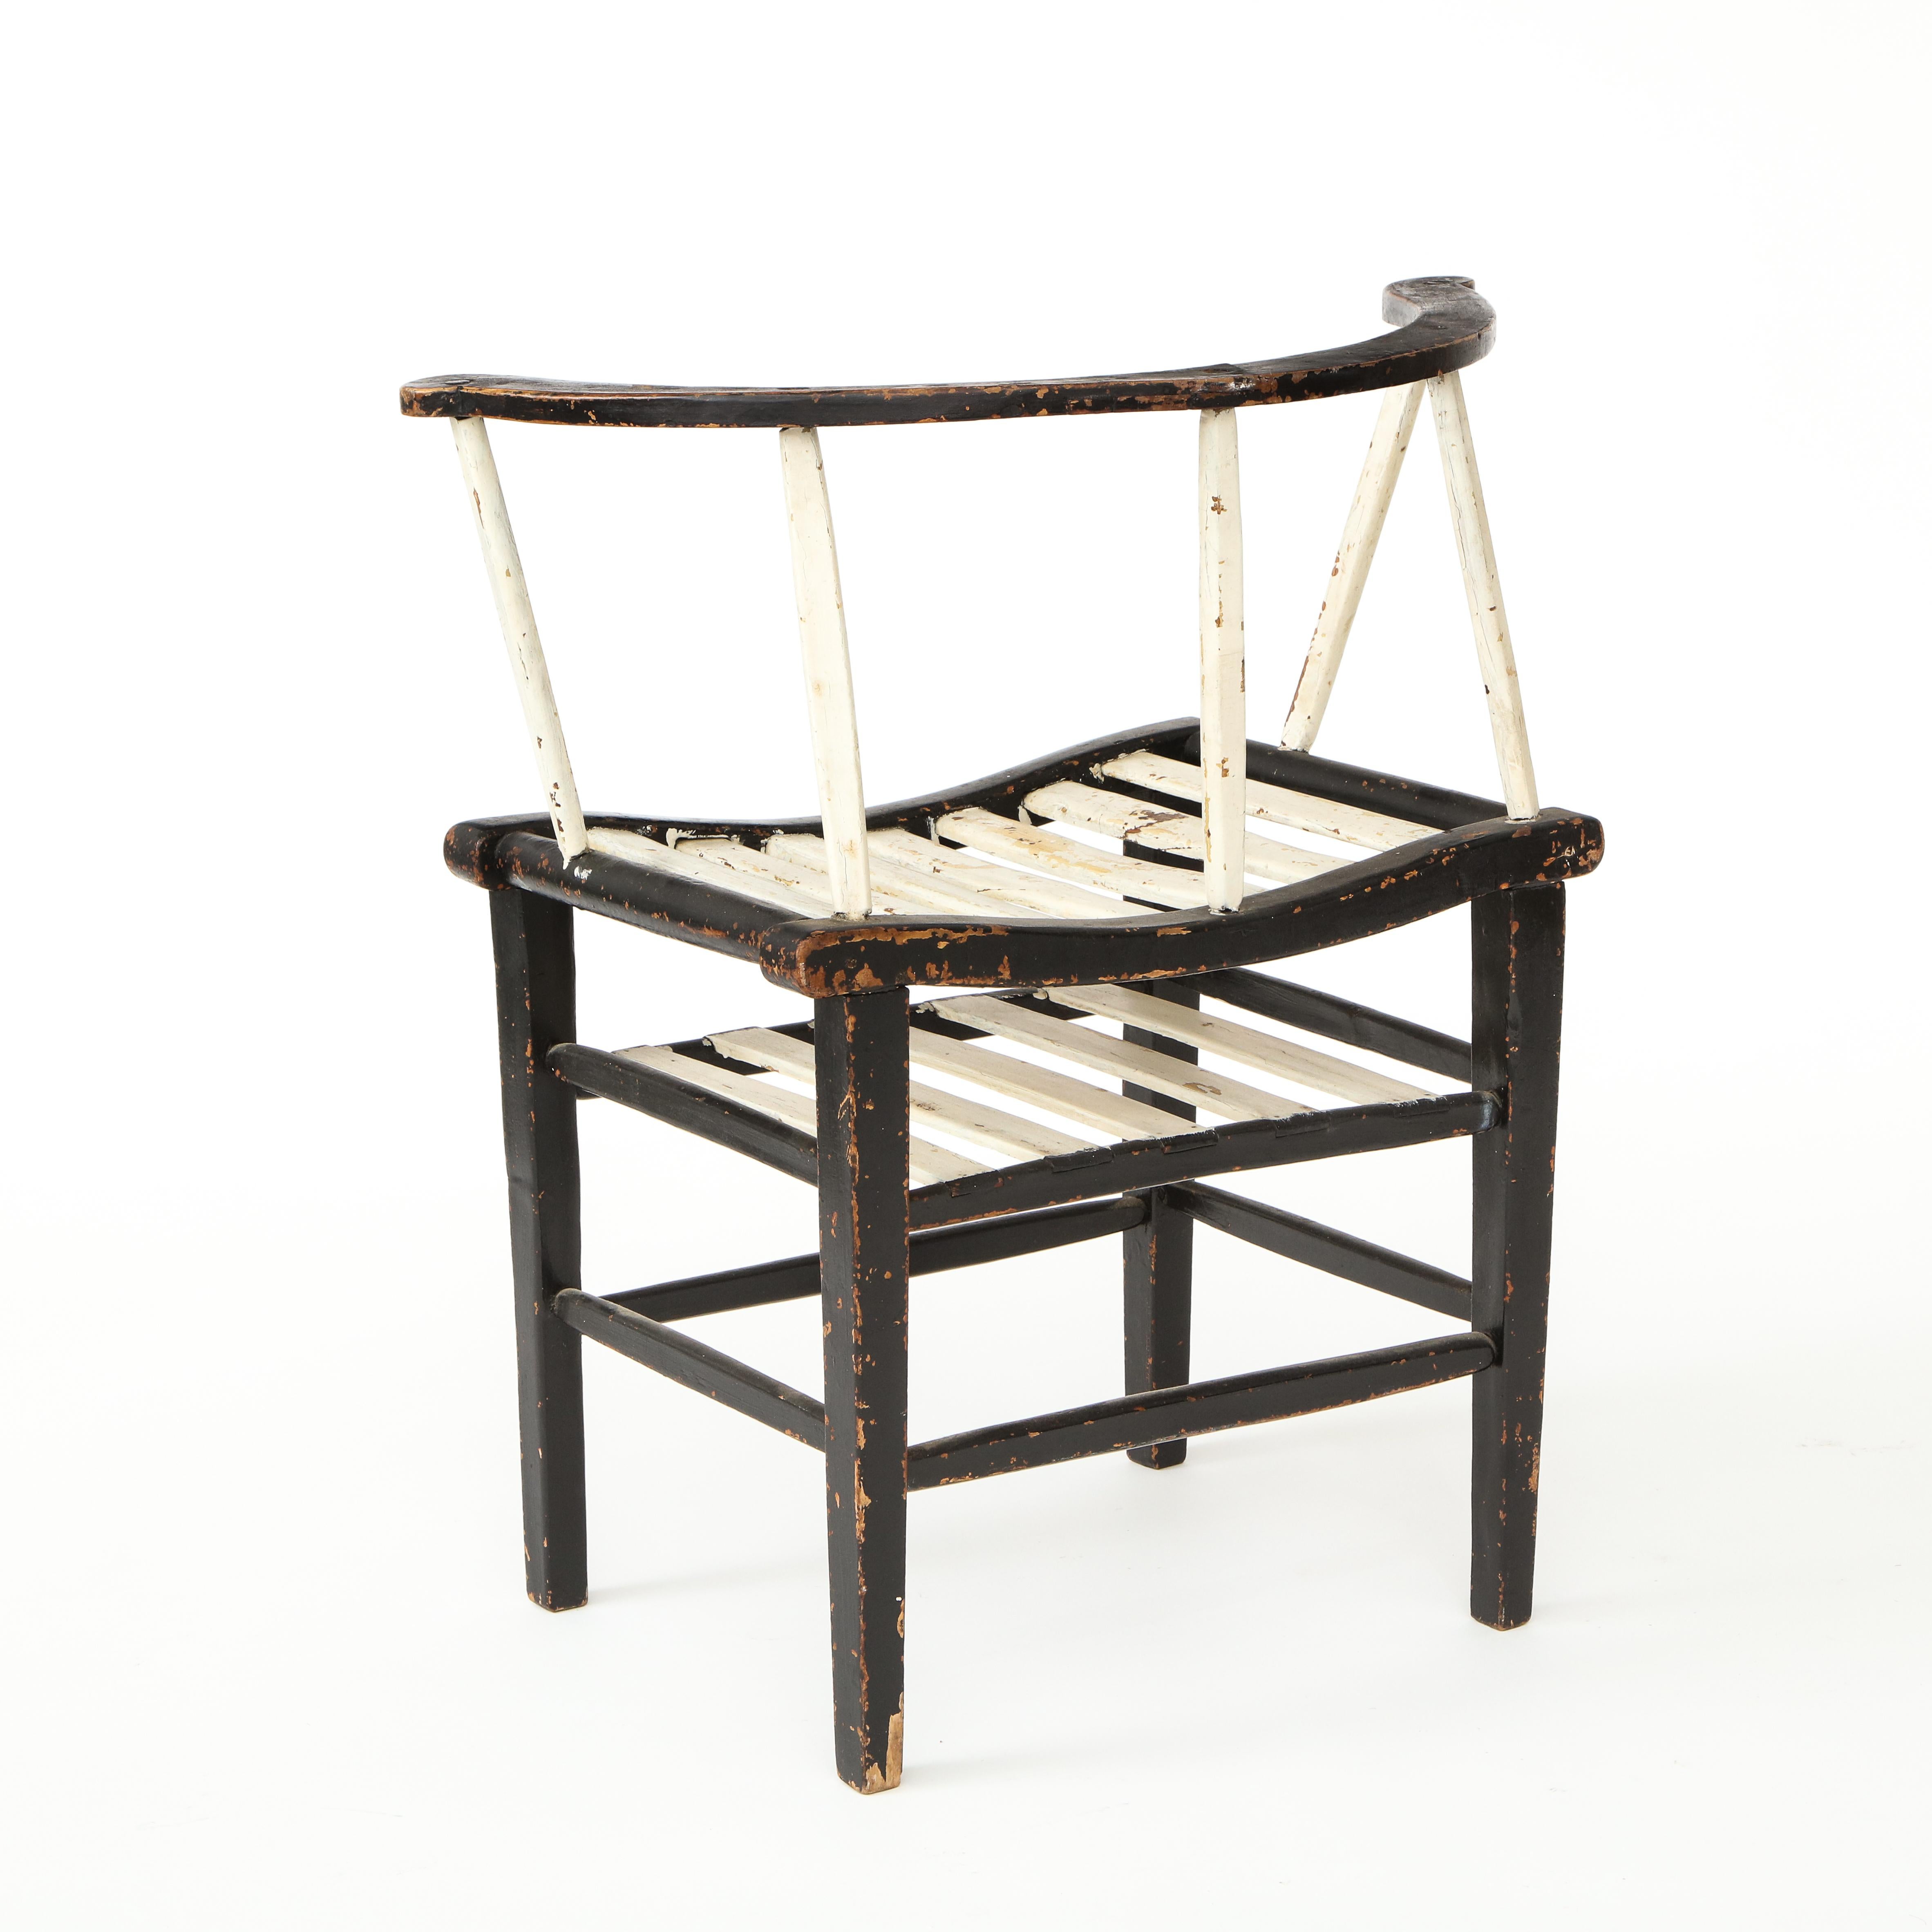 Bentwood Sculptural Painted Black and White Rustic Armchair, France 19th Century